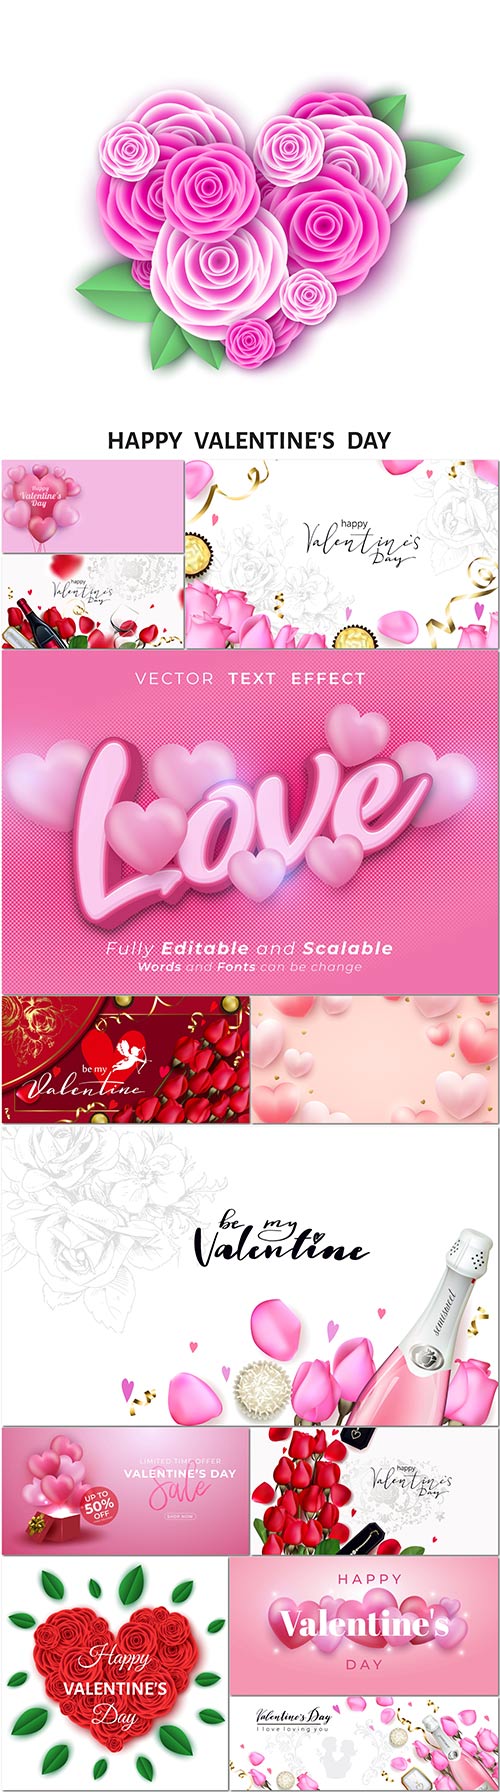 Romantic background with roses for valentine day in vector